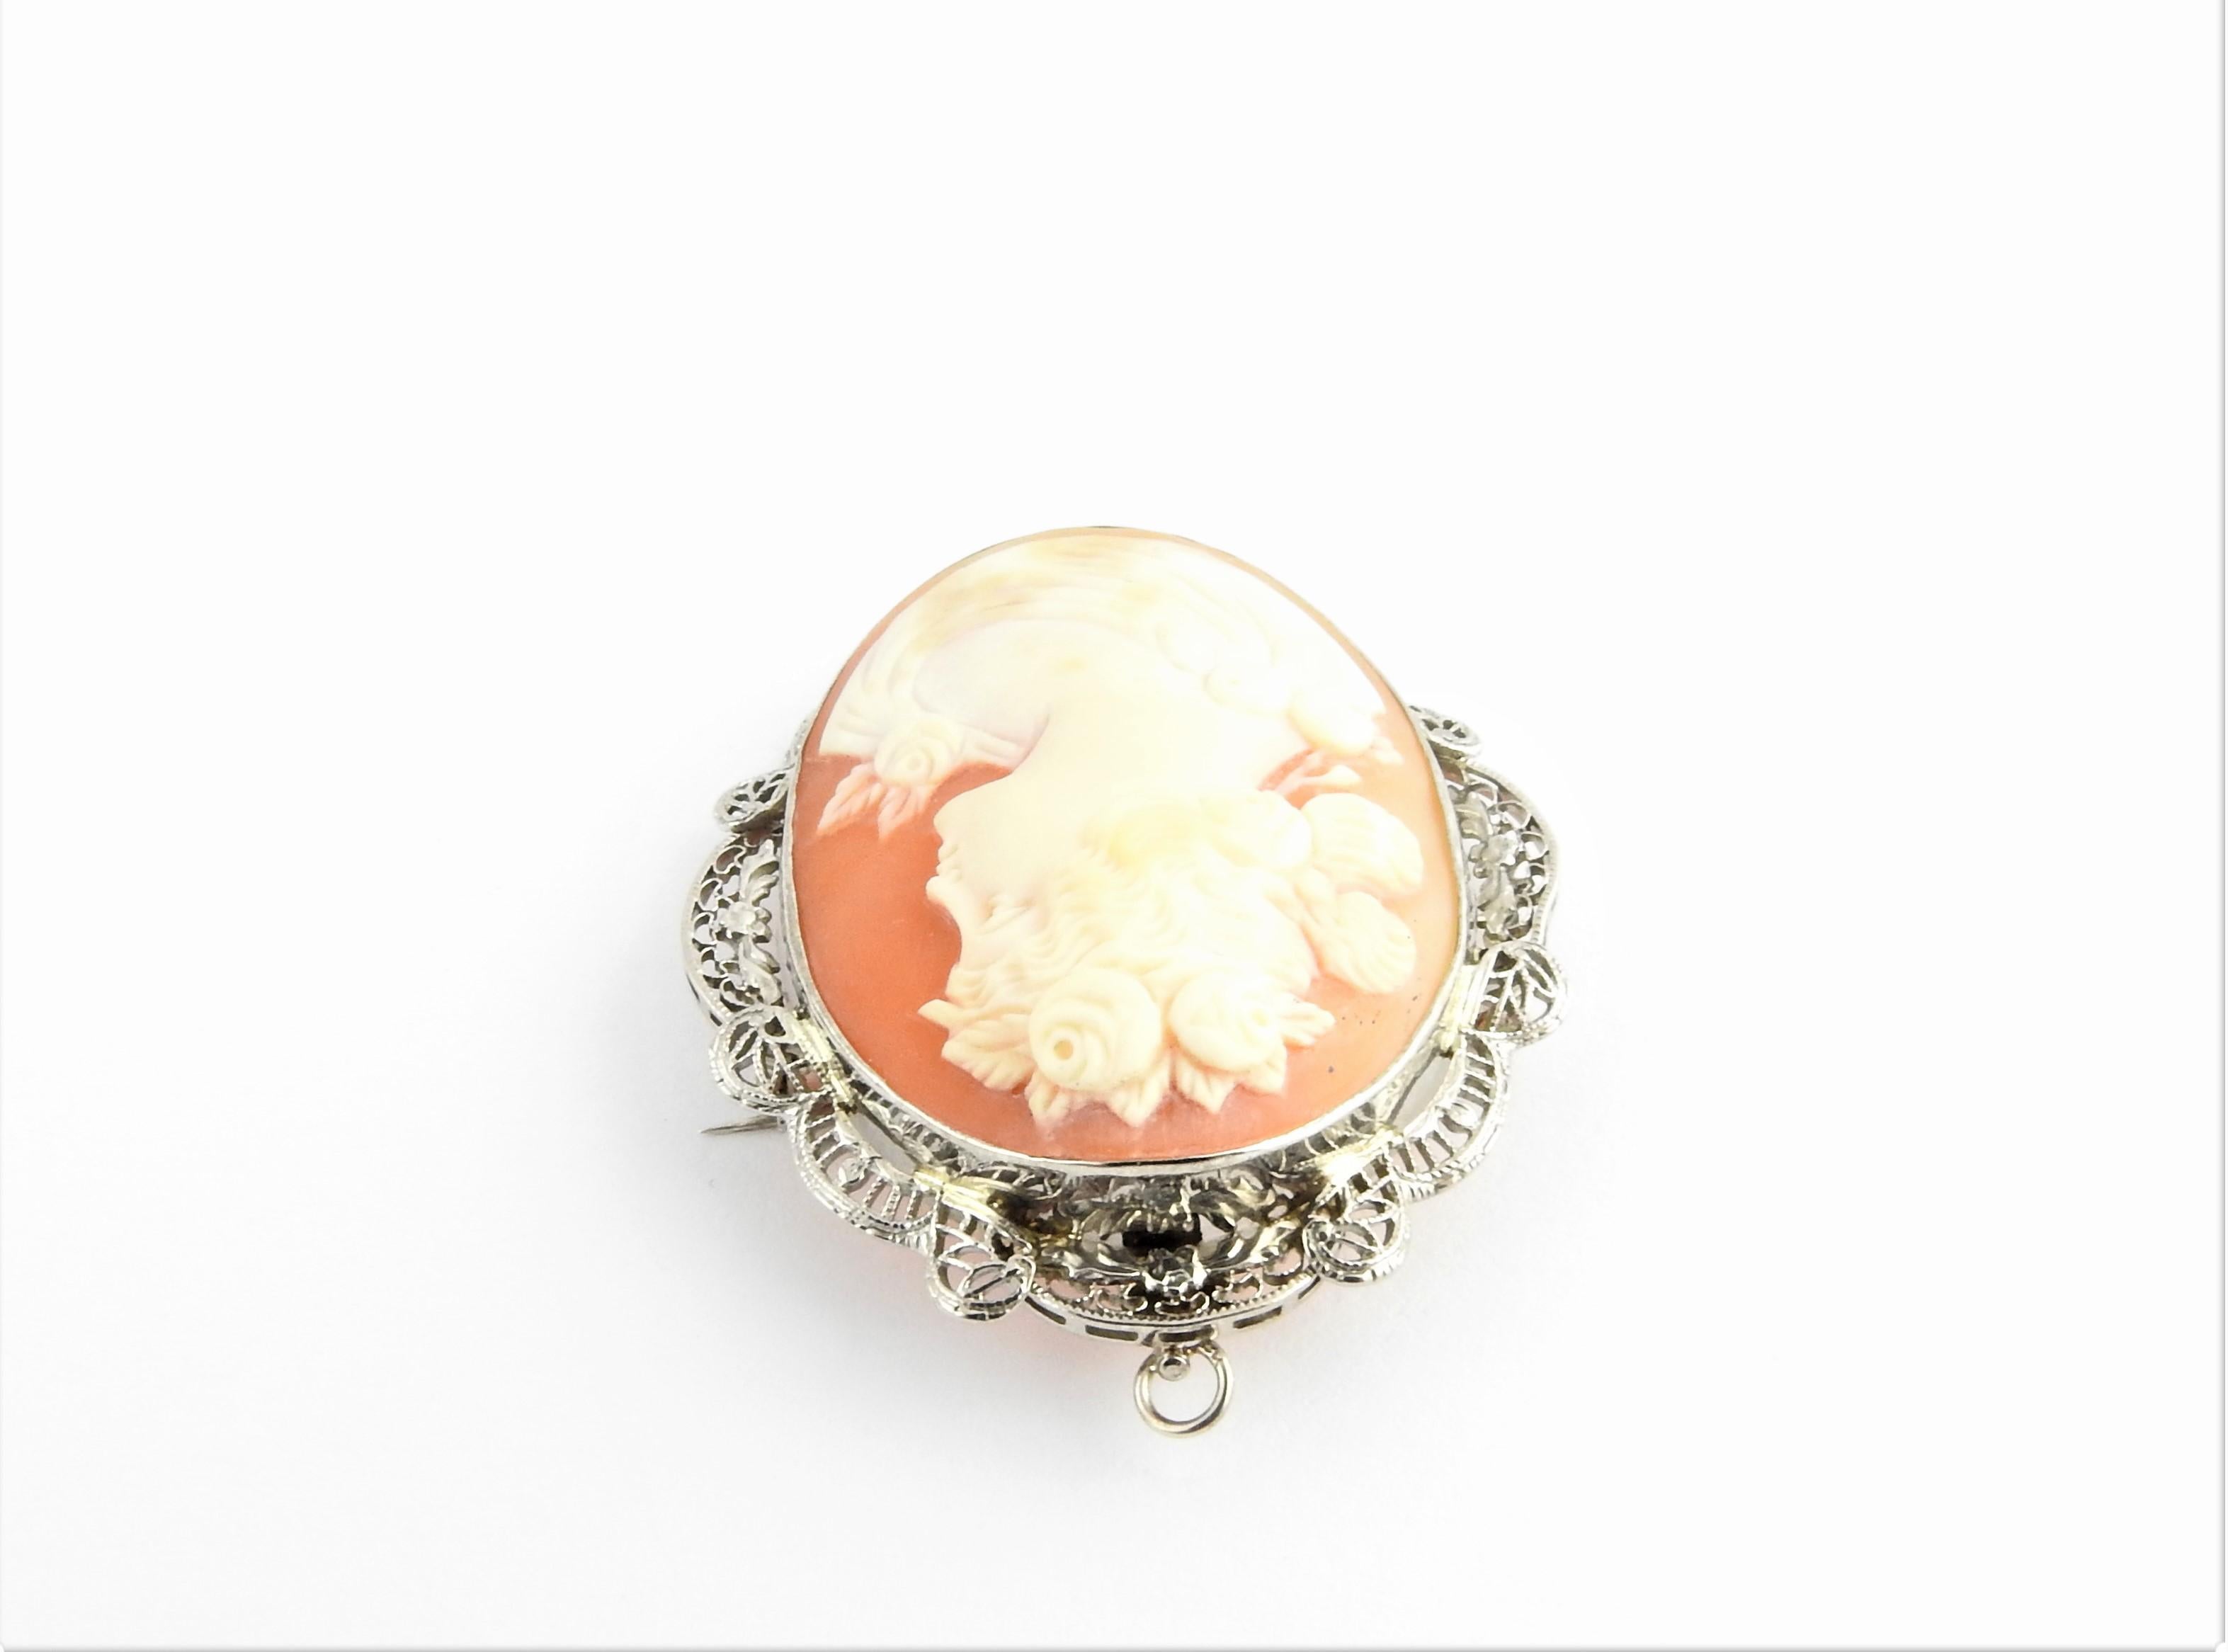 14 Karat White Gold Filigree Cameo Brooch / Pendant In Good Condition For Sale In Washington Depot, CT